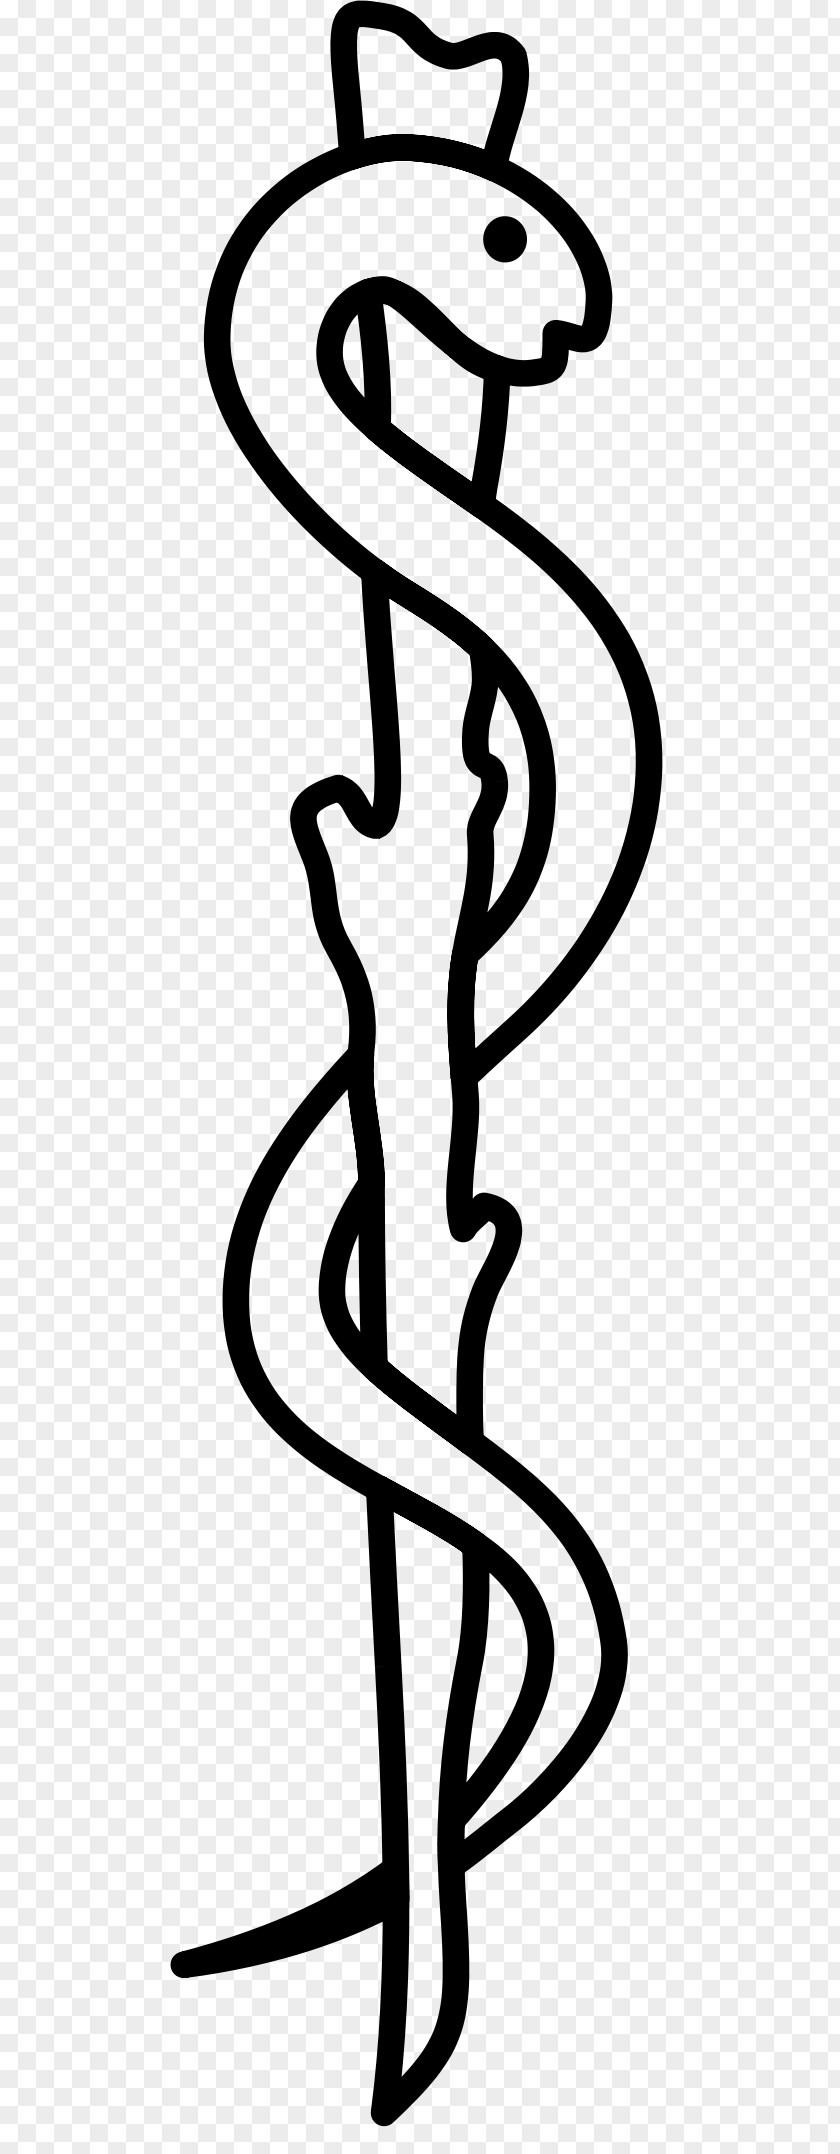 Symbol Asclepeion Apollo Rod Of Asclepius Medicine PNG